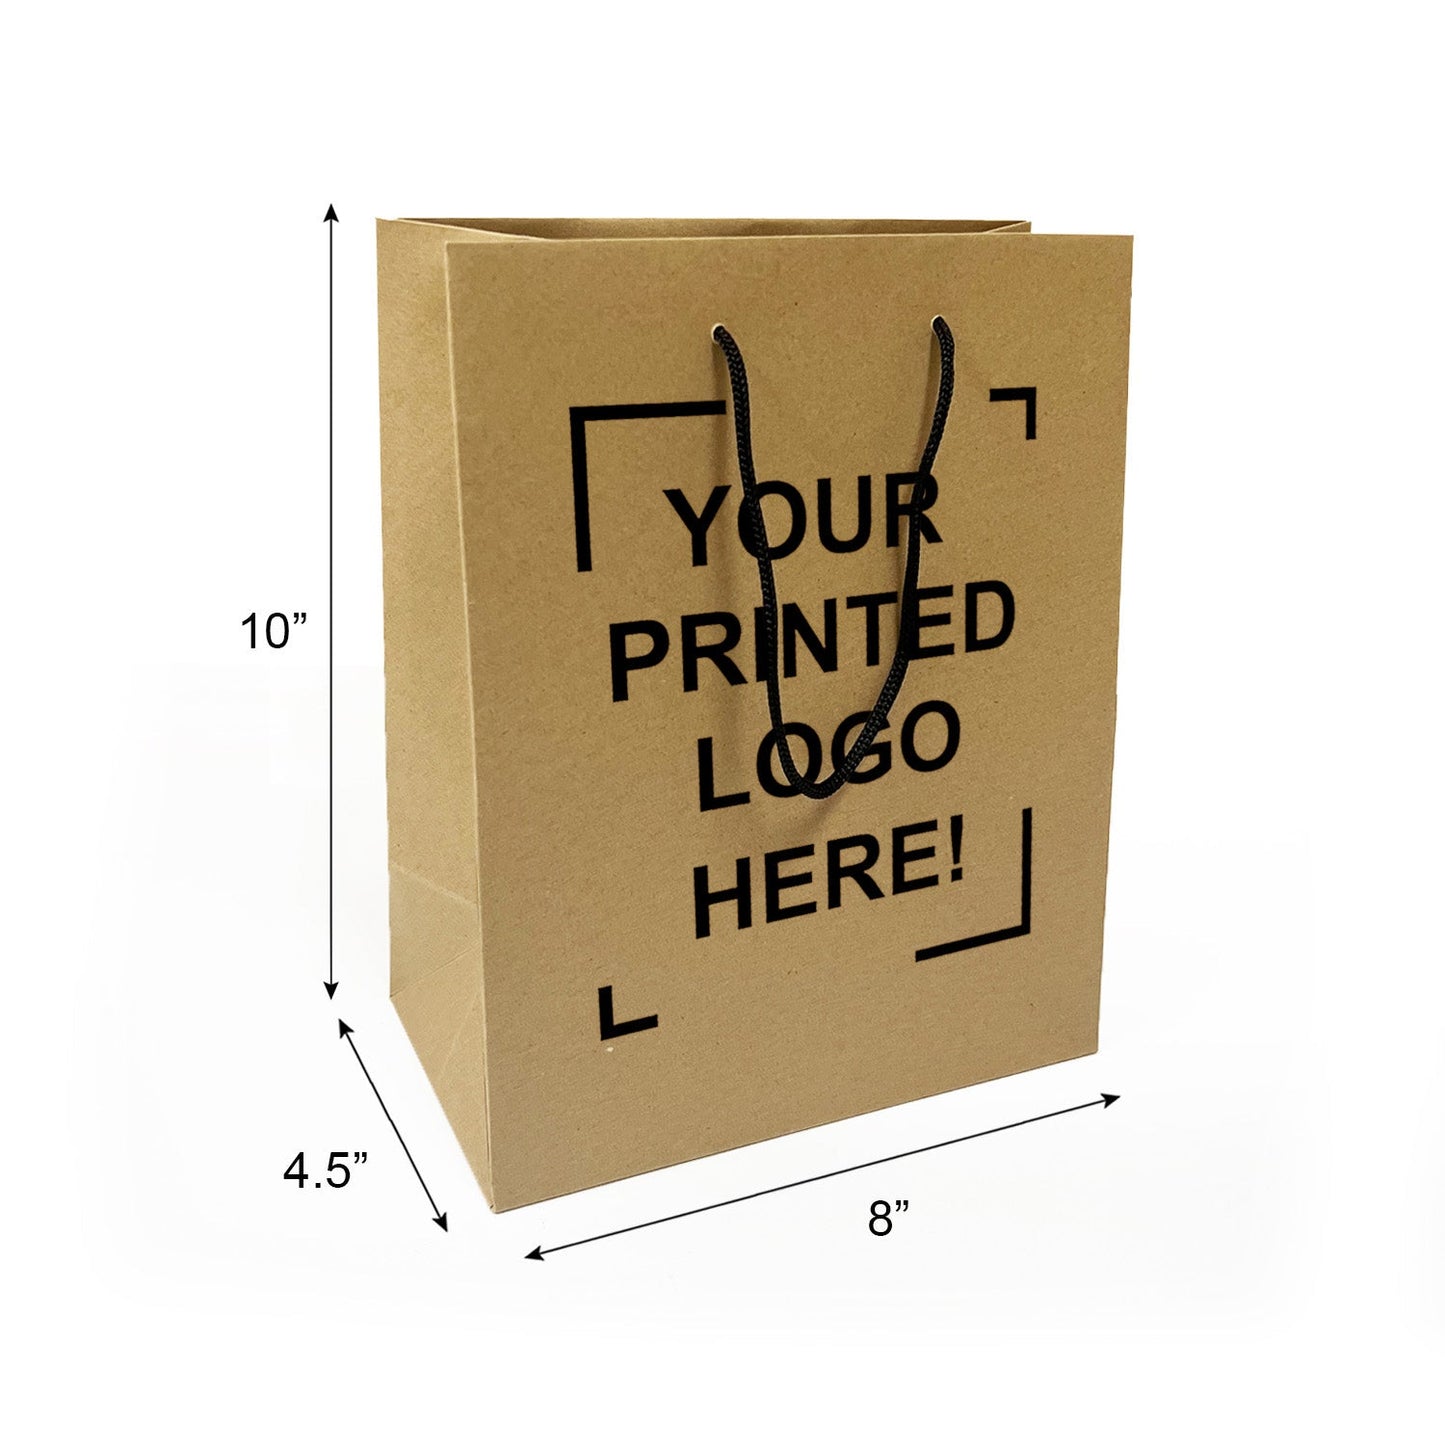 150 Pcs, Cub, 8x4.5x10 inches, Kraft Euro Tote Paper Bags, with Rope Handle, Full Color Custom Print